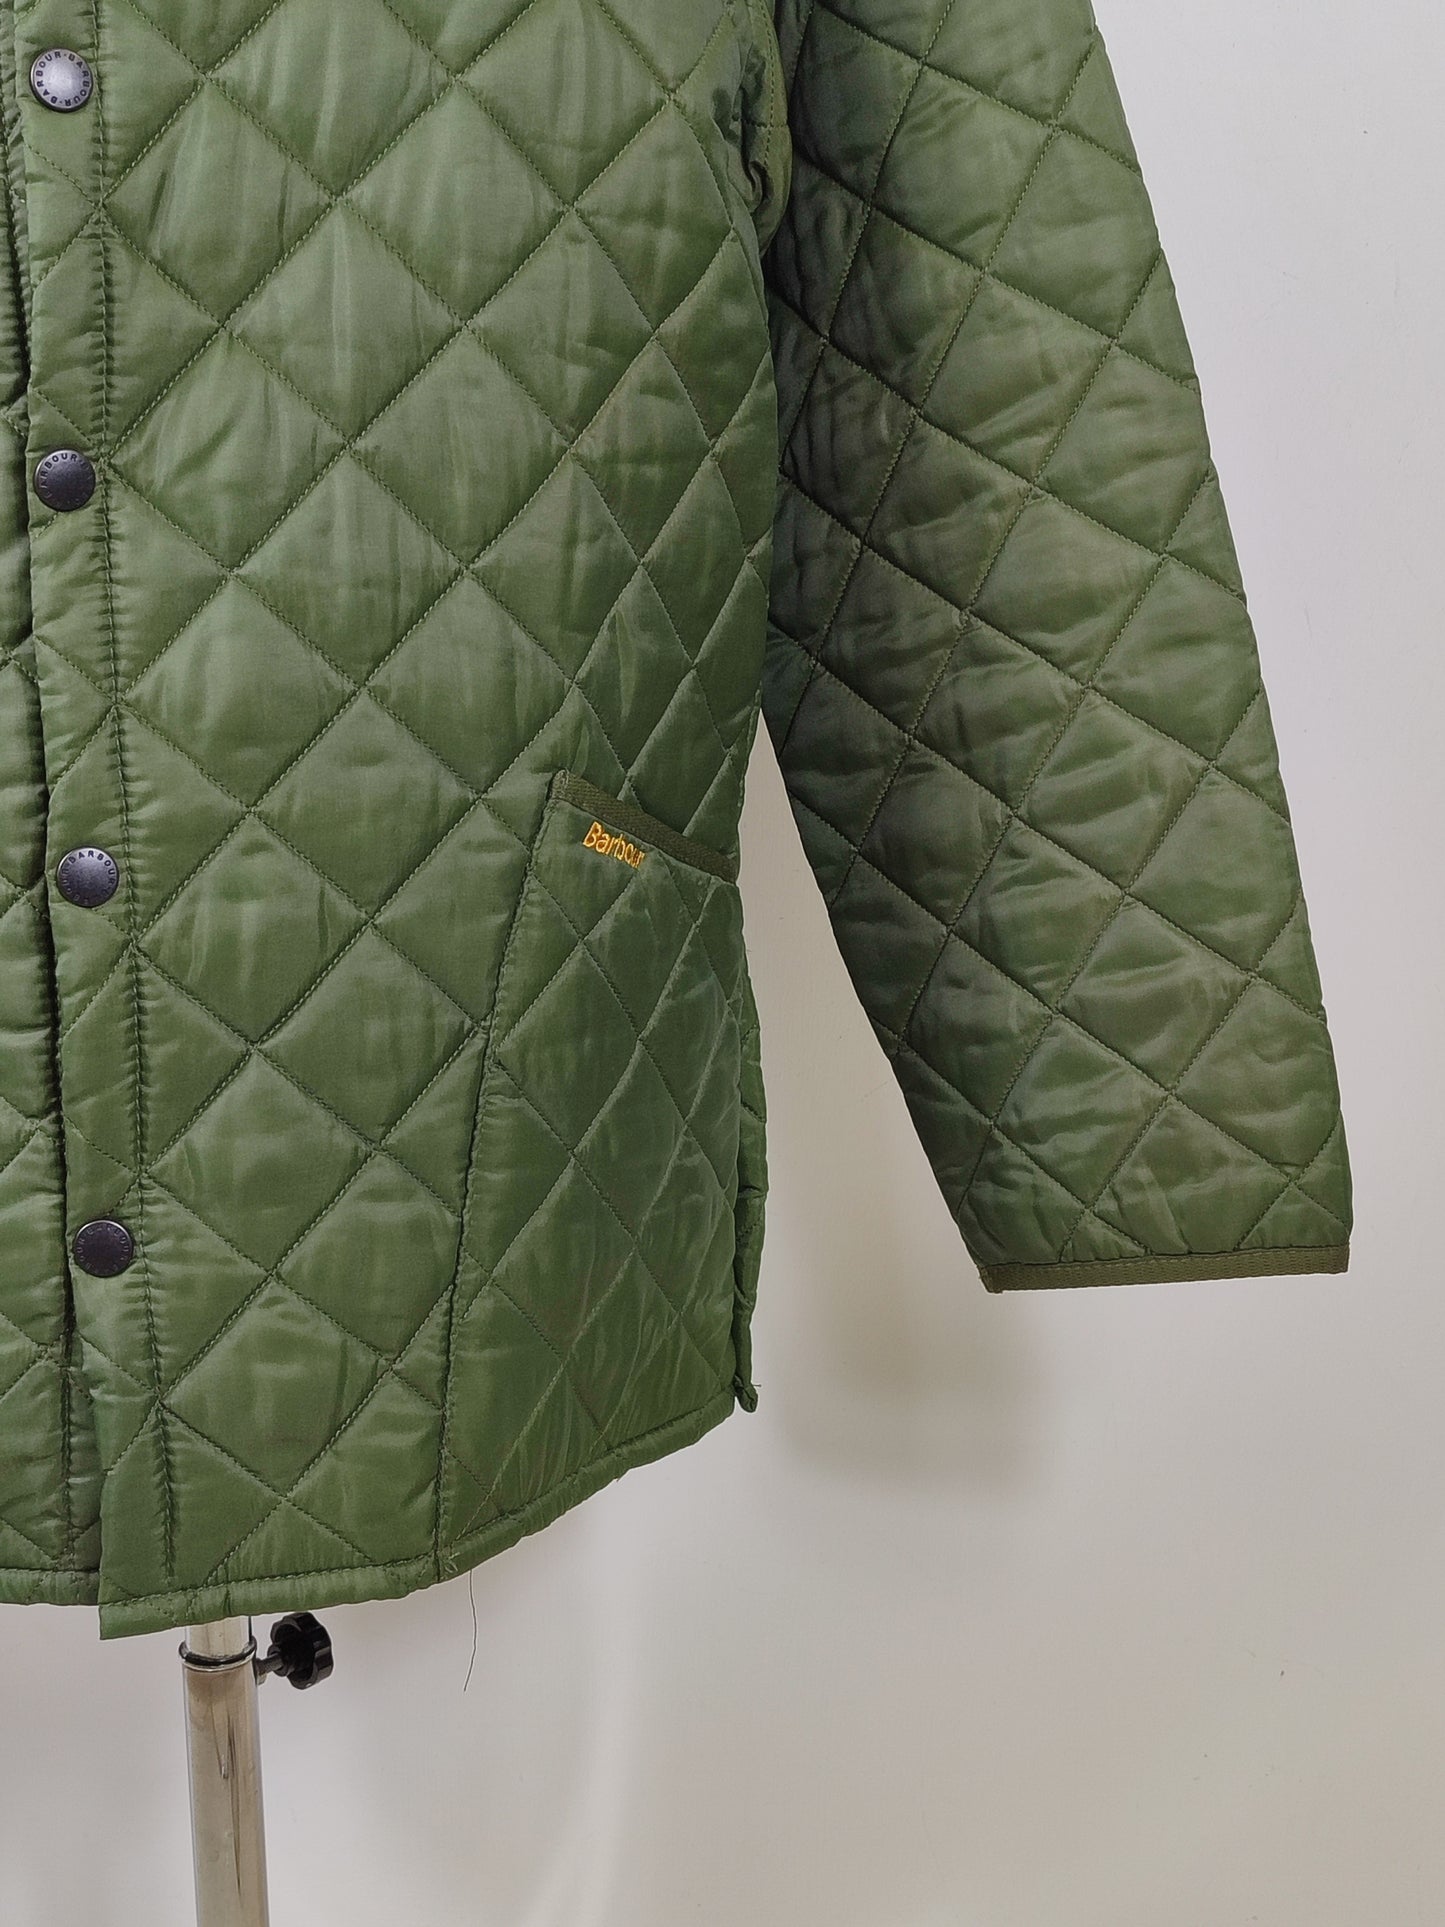 Giacca a vento Barbour verde Liddesdale Small - Quilted Man Green Jacket Size Small